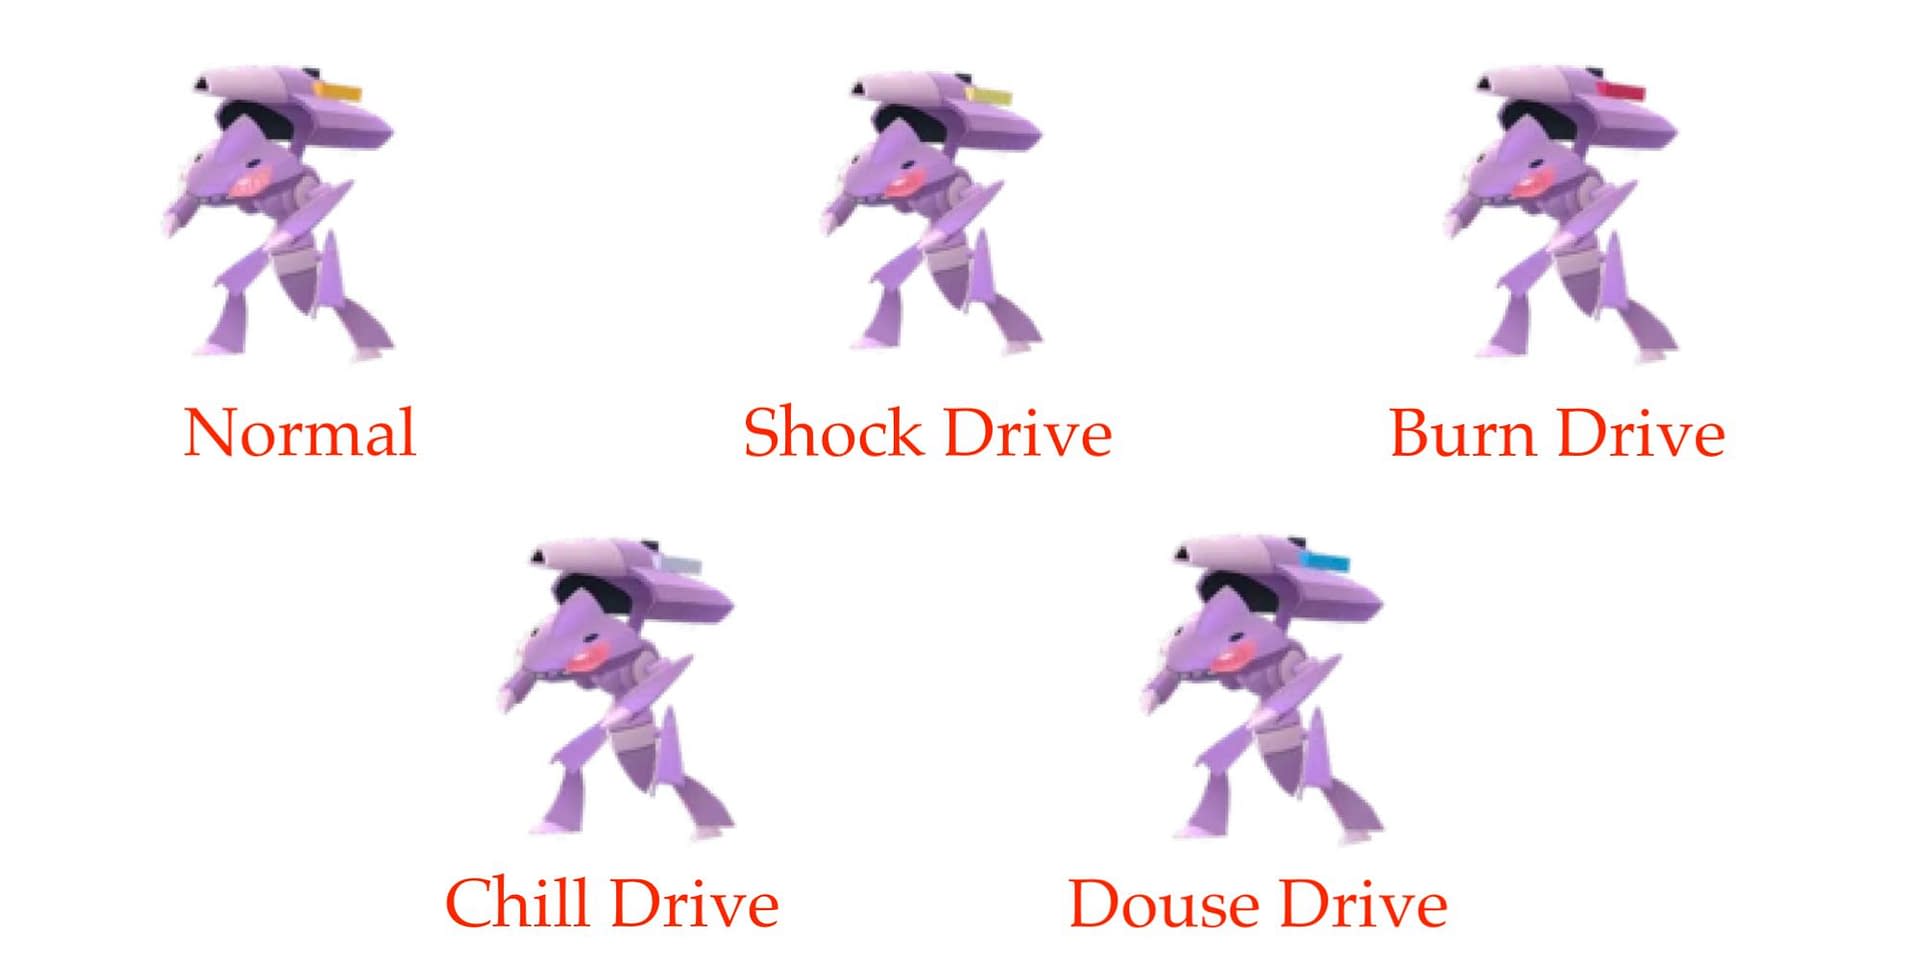 Porygon-Z now learns Techno Blast and changes type to Normal/[held Drive],  with there now being one for each type (including Normal). Genesect does  not change type but receives all other applicable benefits.